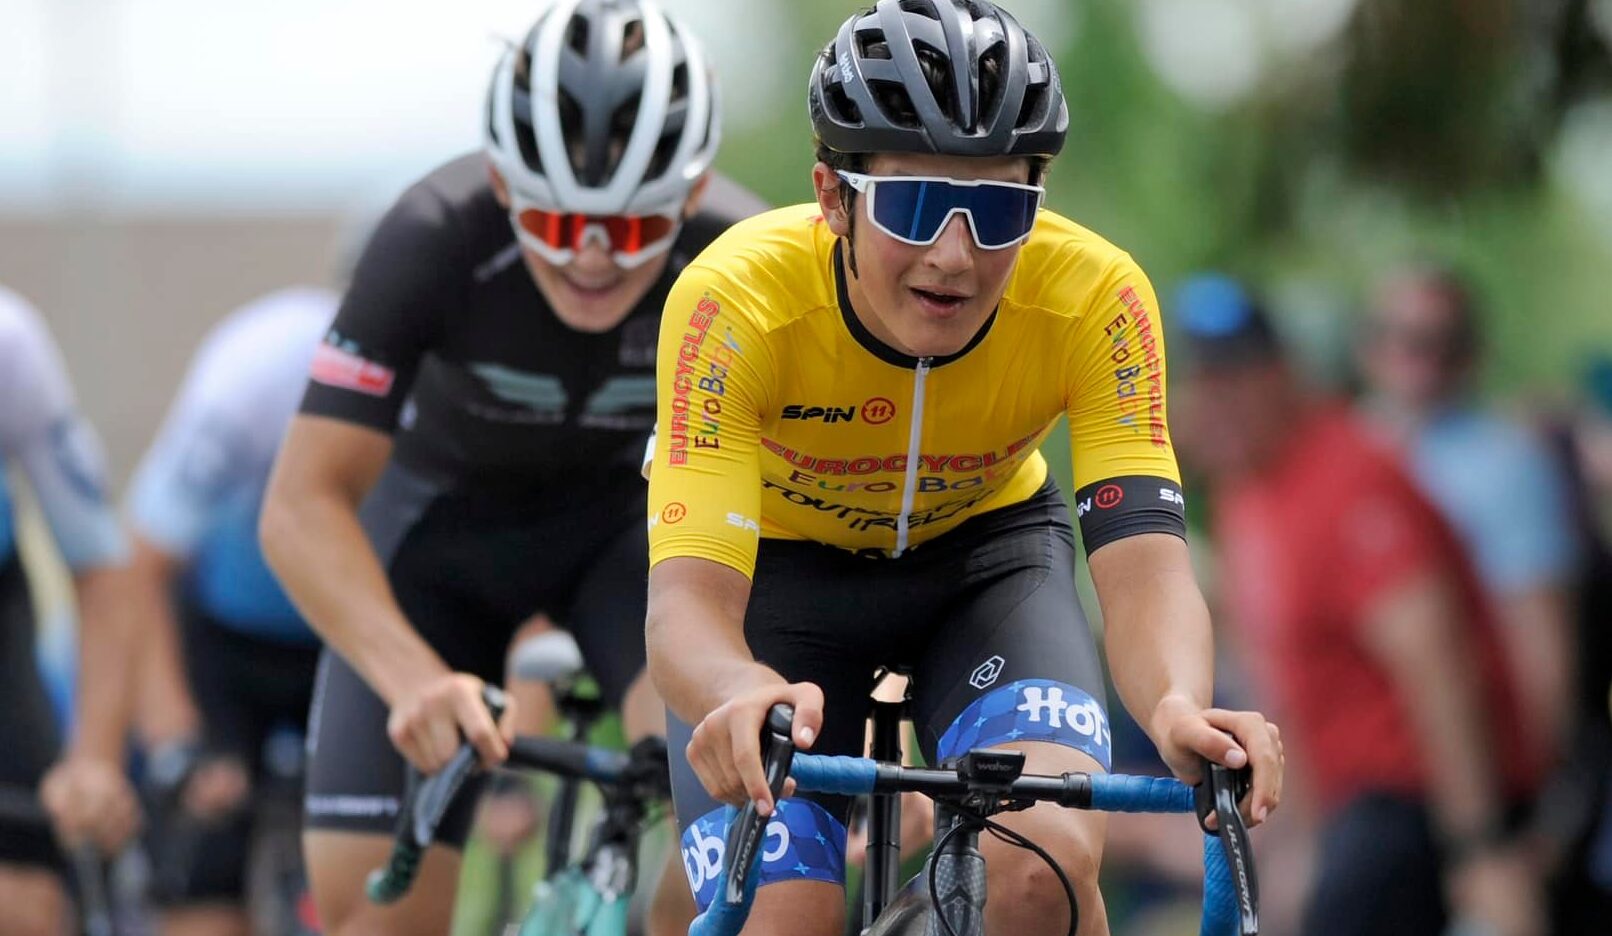 Last year’s Junior Tour of Ireland winner signs with Ineos Grenadiers